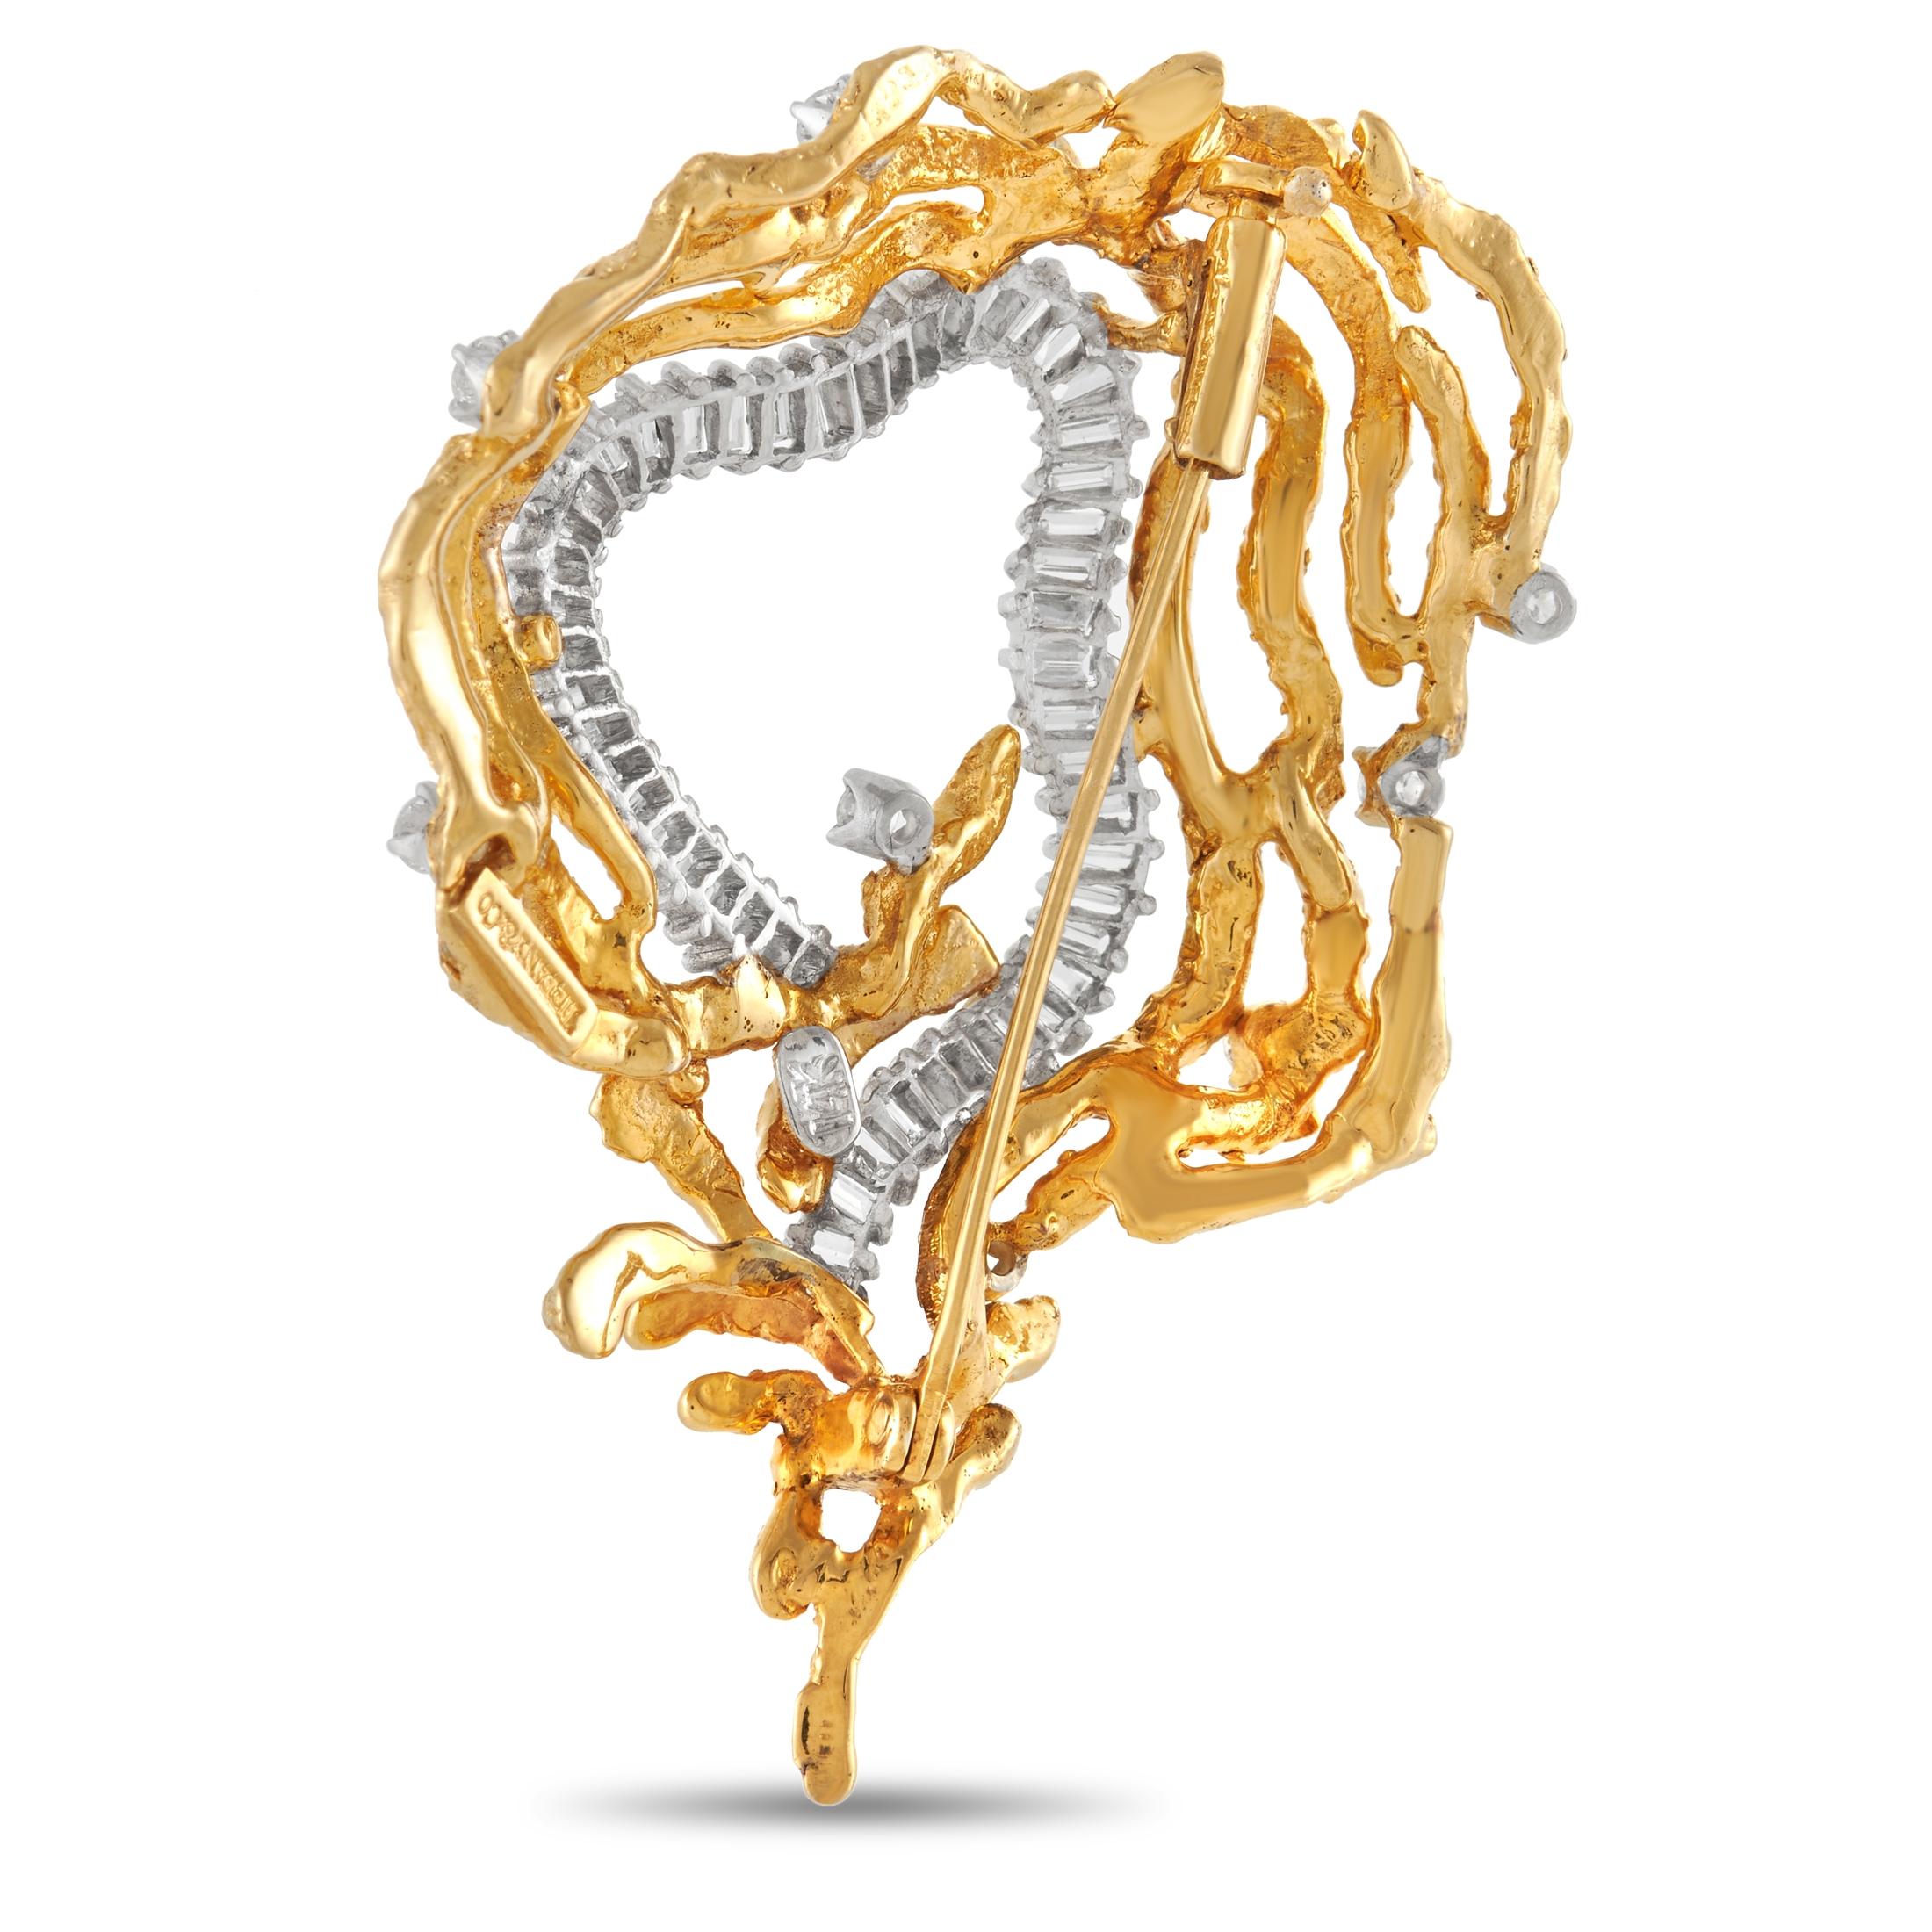 This vintage piece from Tiffany & Co. is endlessly captivating. A pairing of 14K yellow gold and 14K white gold metalwork adds extra dimension to this daring design, which measures 2” long and 1.75” wide. Diamonds totaling 2.0 carats add a touch of